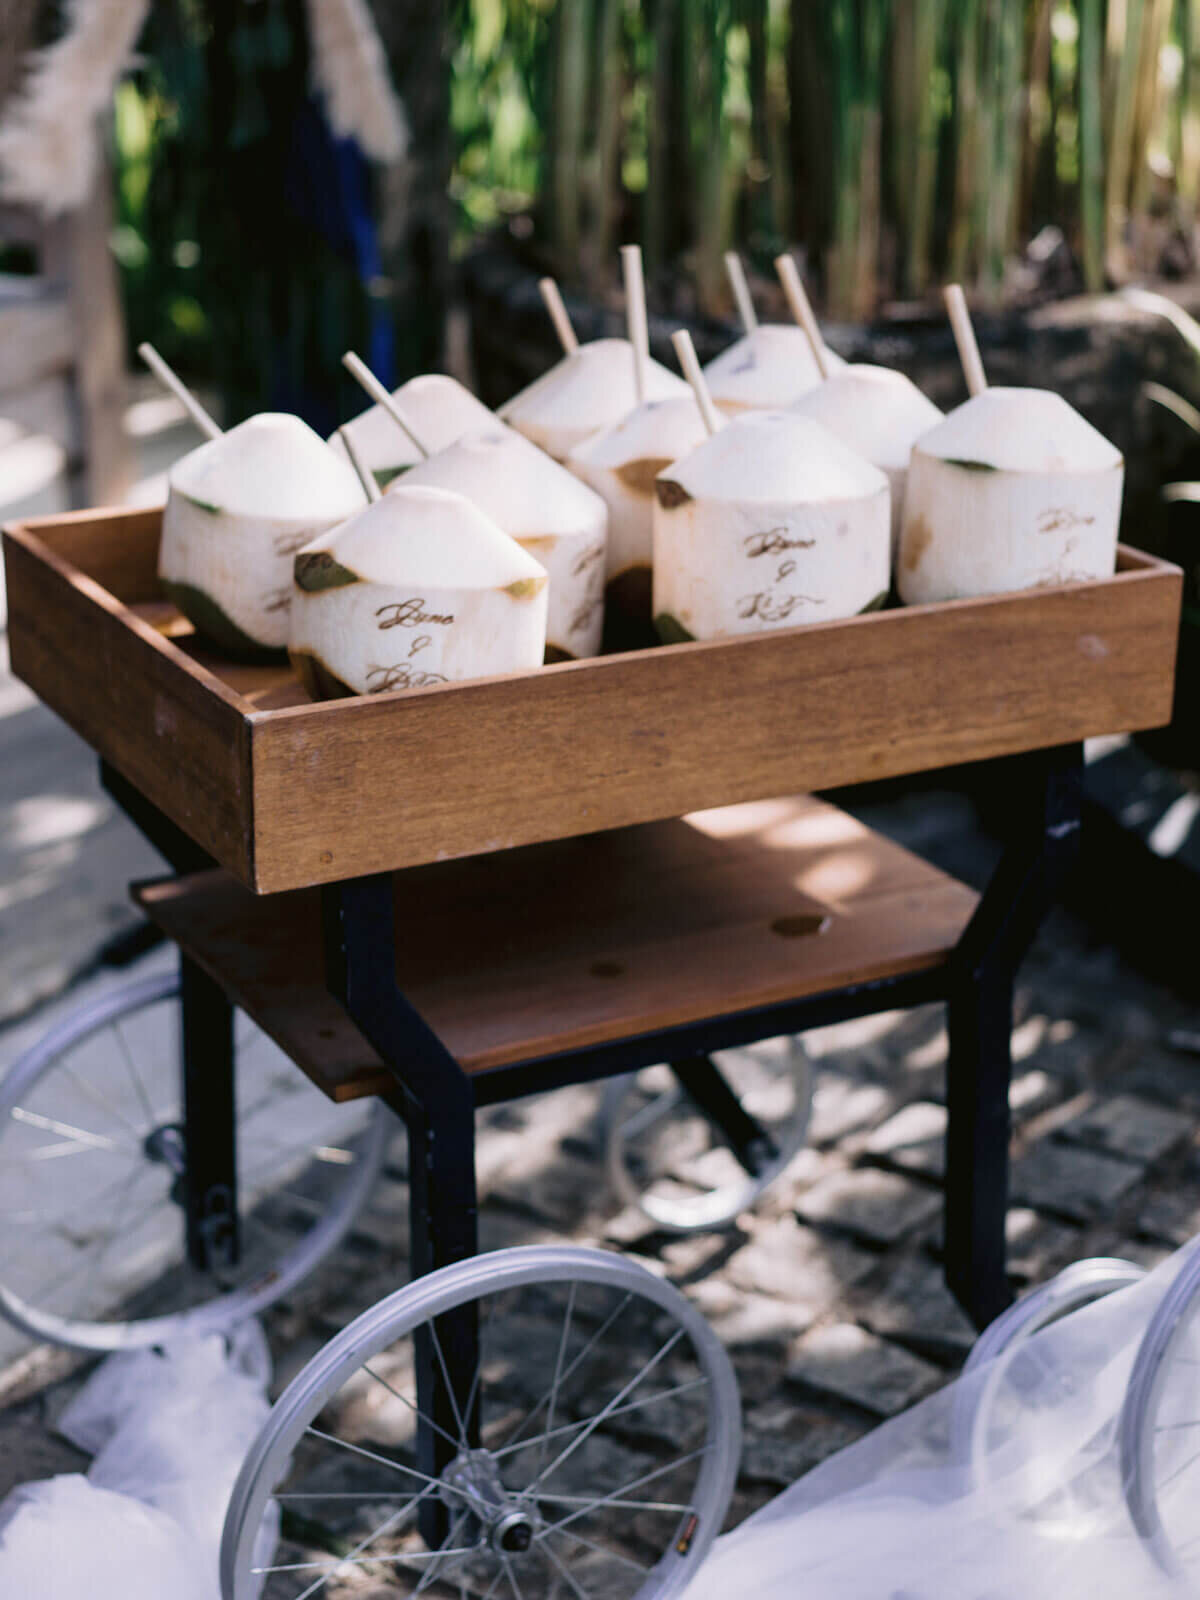 Coconuts ready to drink with a straw, are on a wooden display cart for a wedding in Khayangan Estate, Indonesia. Image by Jenny Fu Studio